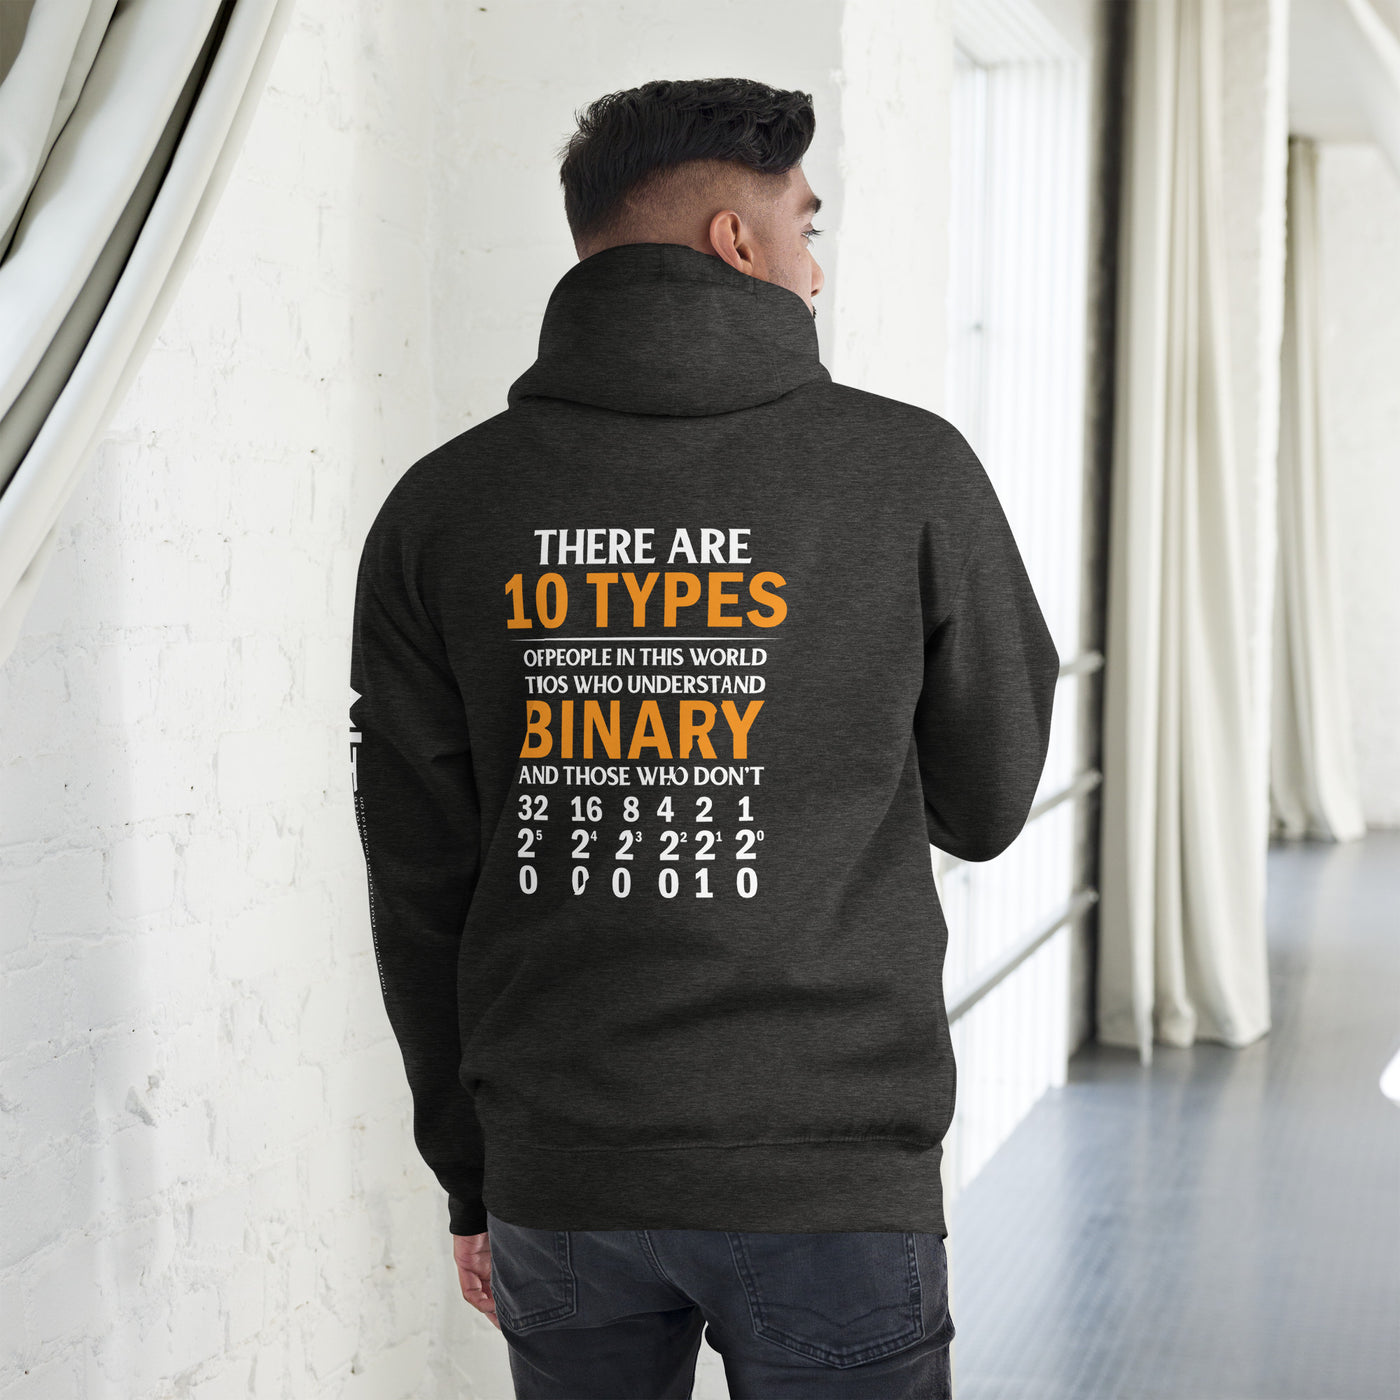 There are always 10 Types of People in this World - Unisex Hoodie ( Back Print )